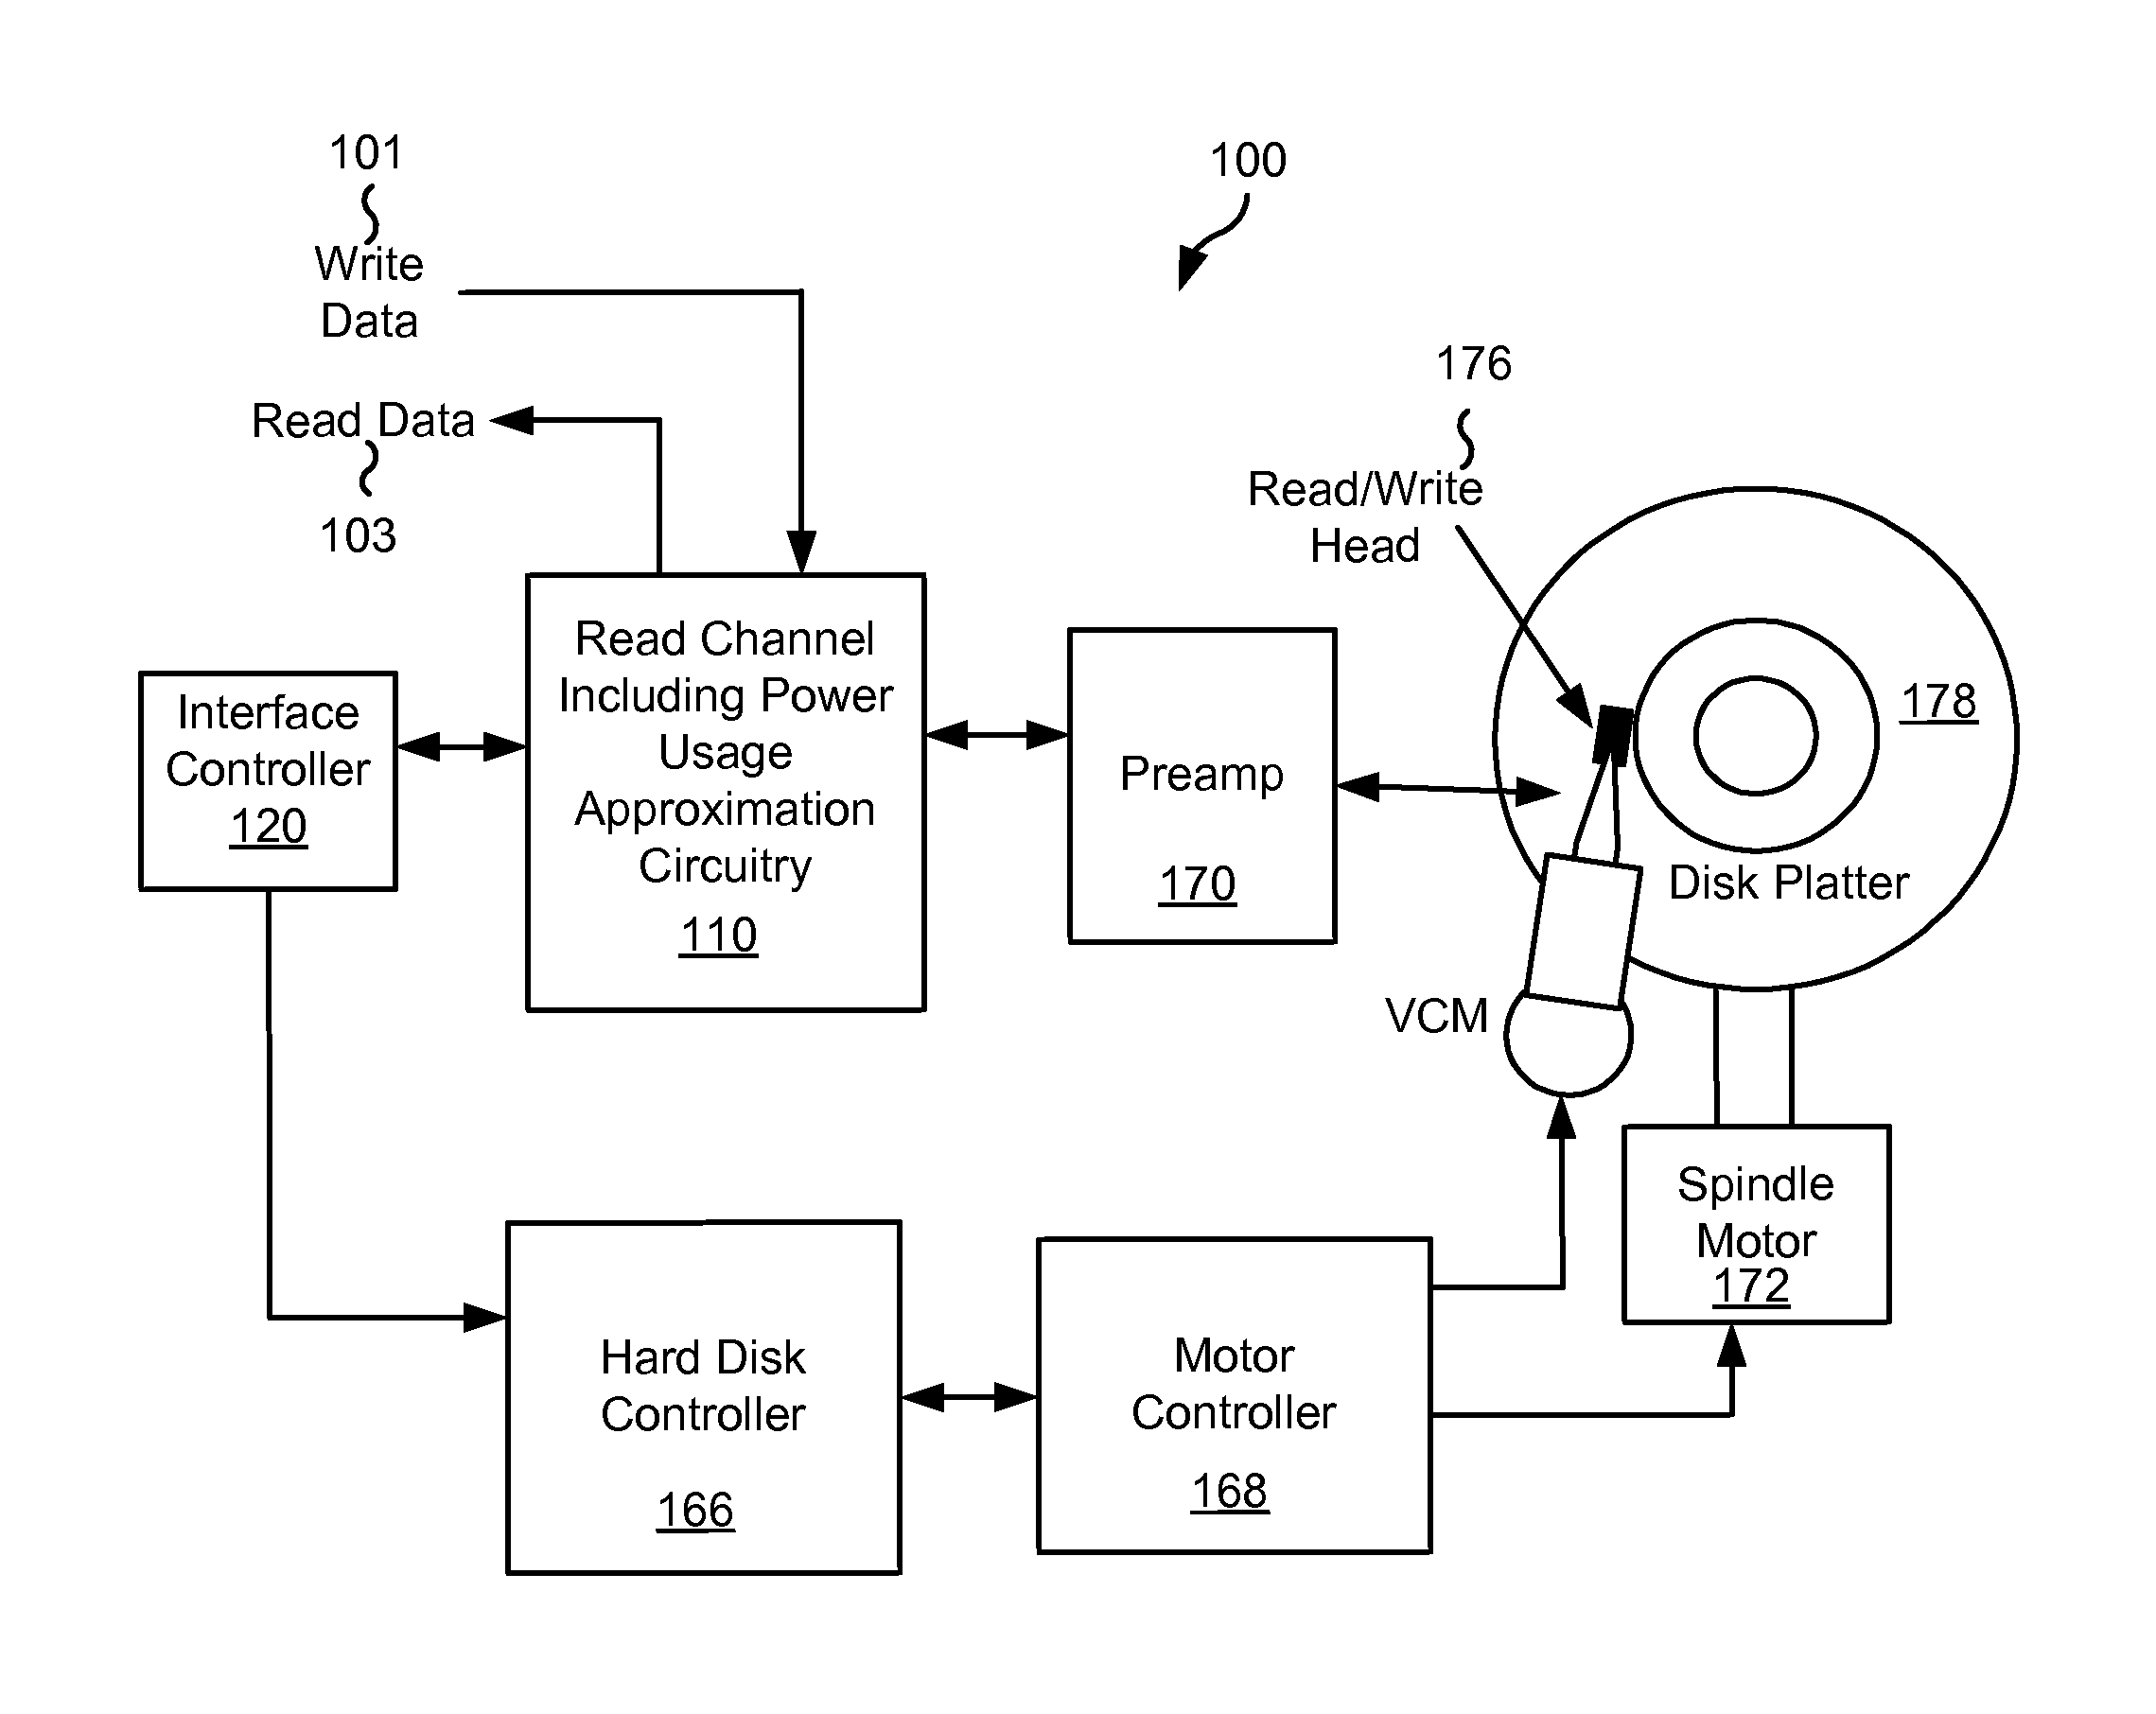 Systems and Methods for Power Measurement in a Data Processing System